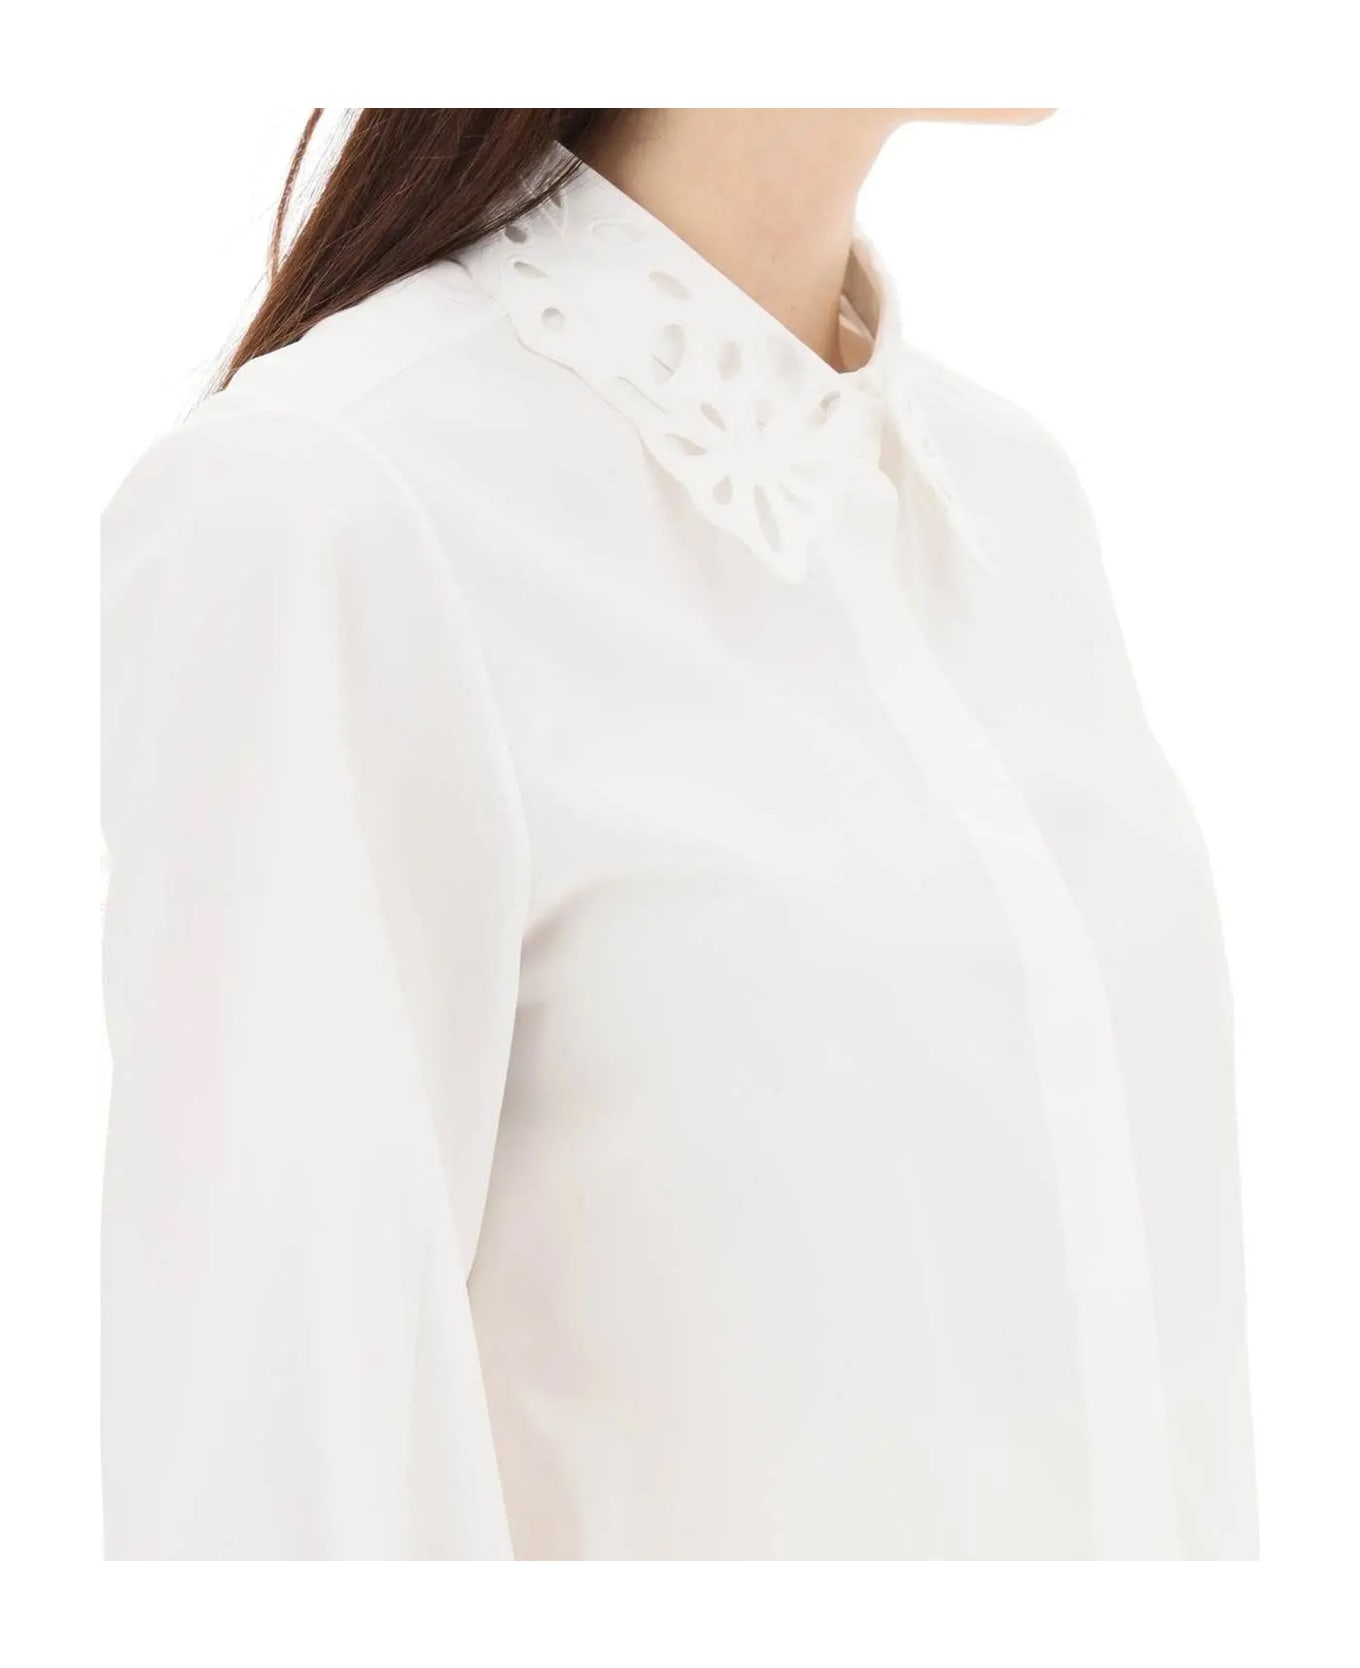 Chloé Cotton Embroidered Shirt - White ブラウス